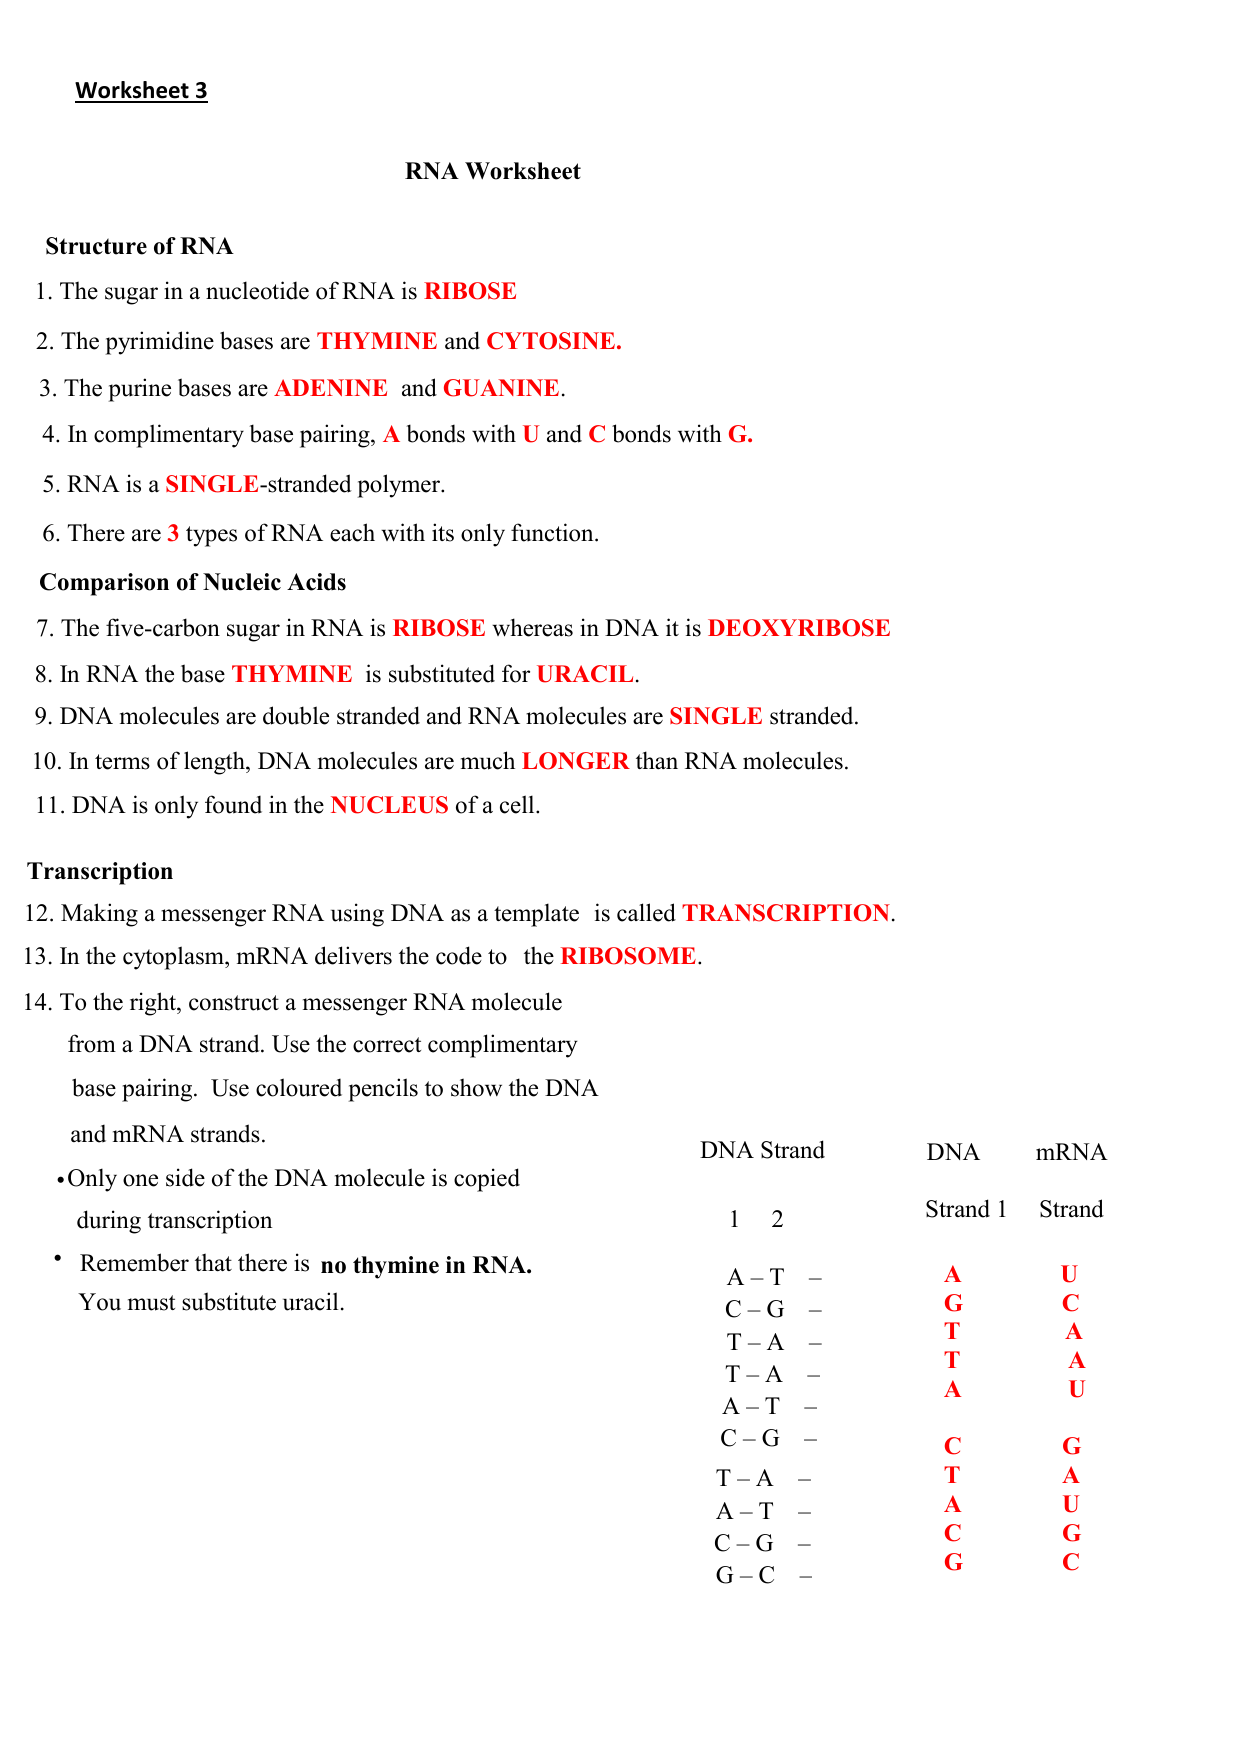 Worksheet 25 - The NSA at Work For Dna And Rna Worksheet Answers